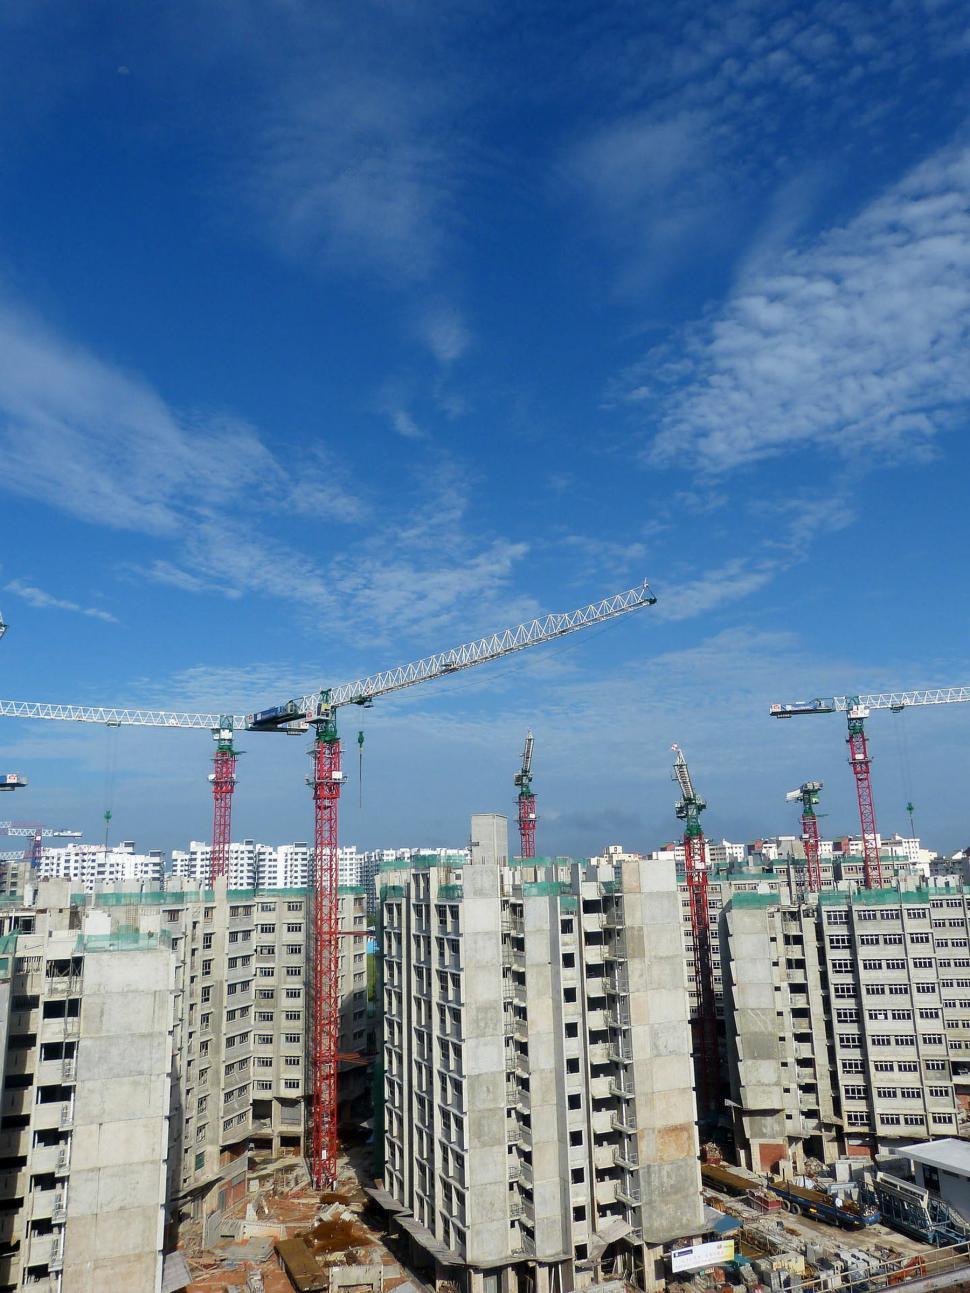 Free Image of Buildings under construction 